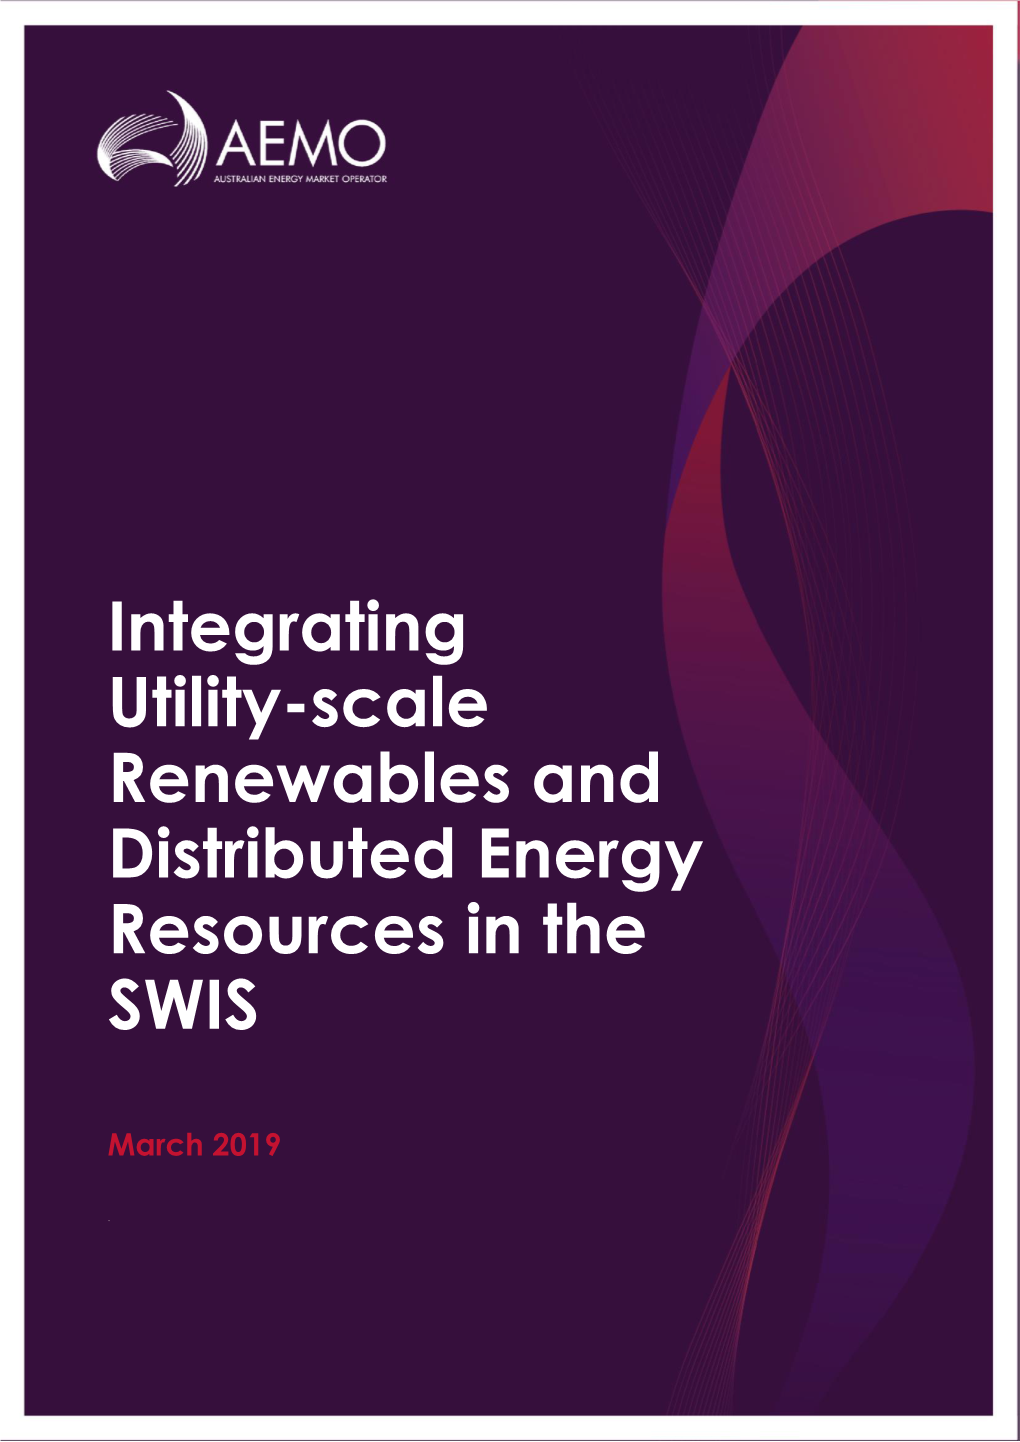 Integrating Utility-Scale Renewables and Distributed Energy Resources in the SWIS